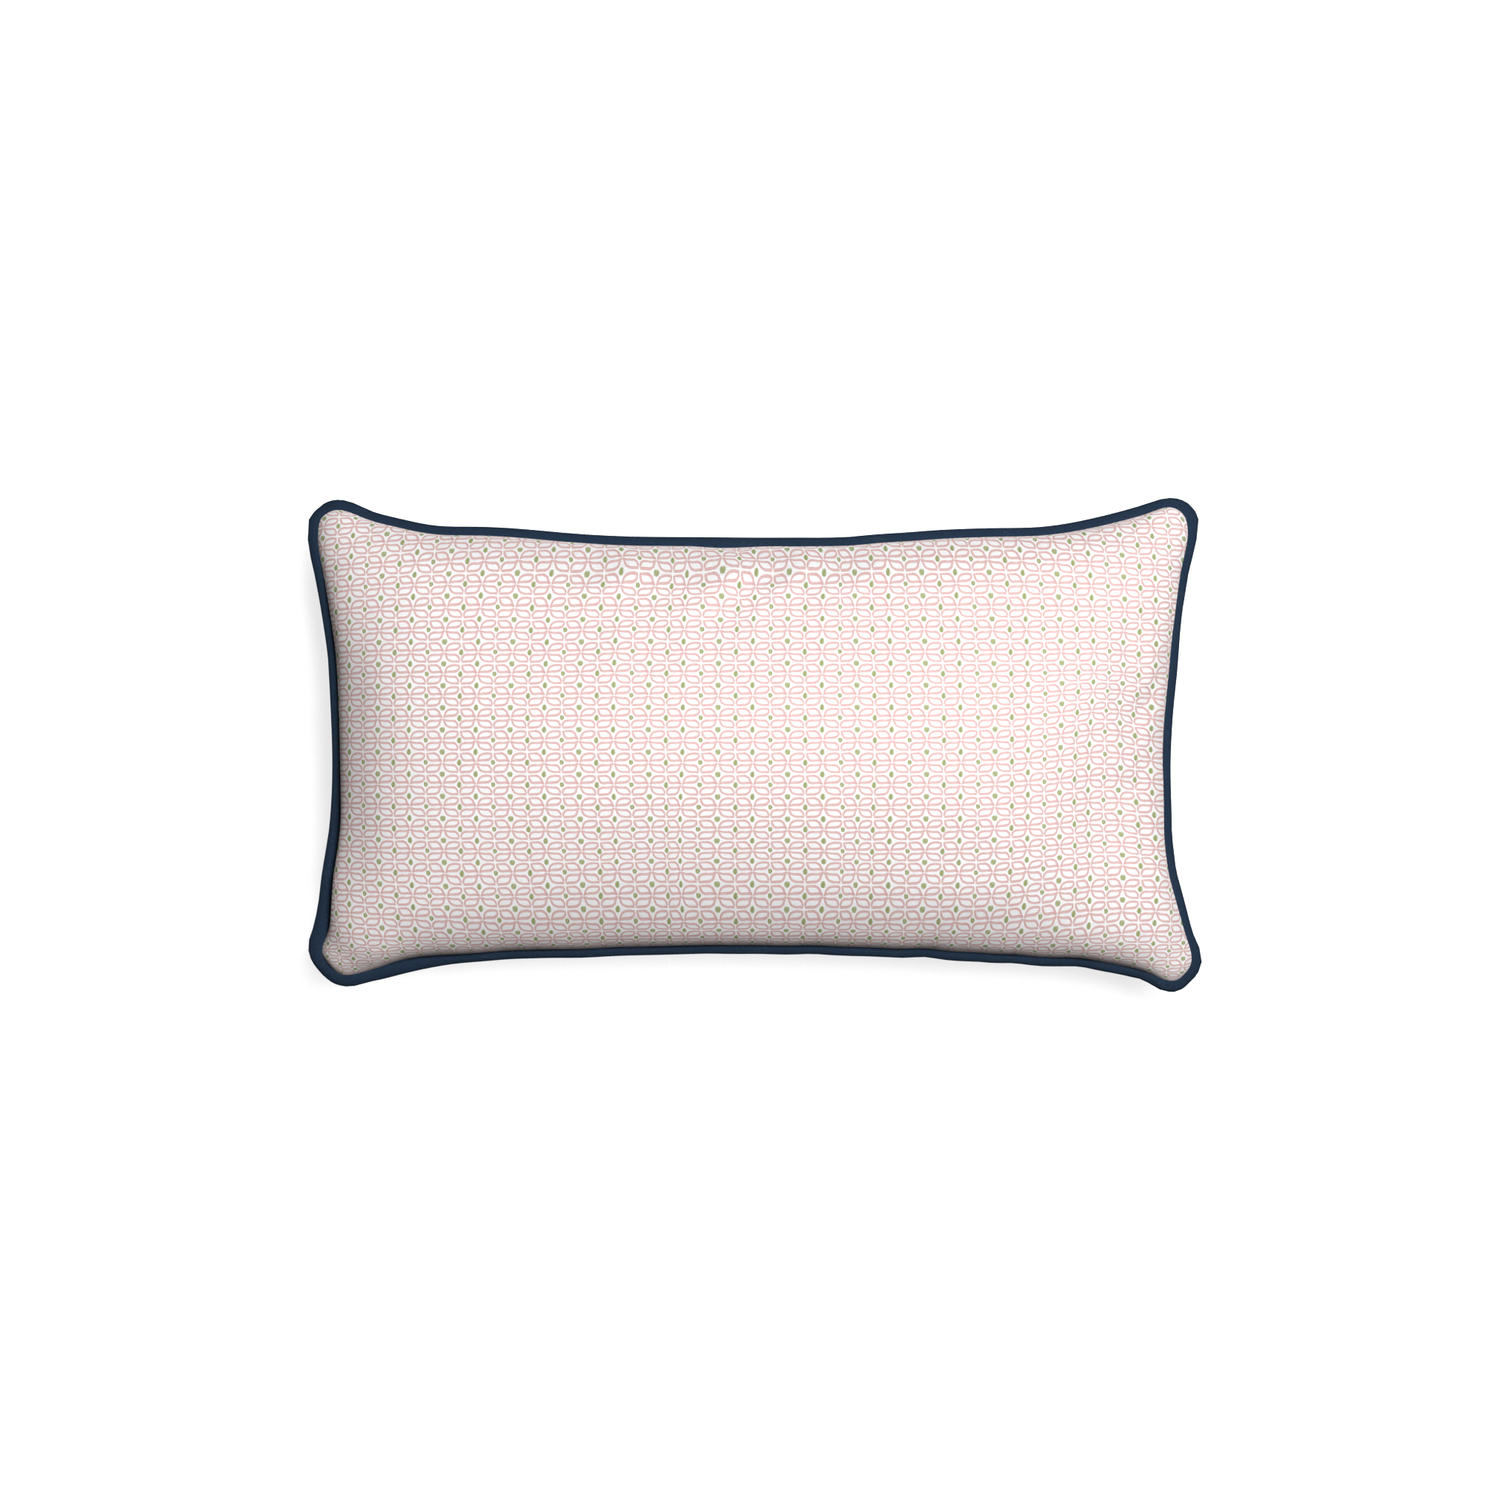 Petite-lumbar loomi pink custom pink geometricpillow with c piping on white background